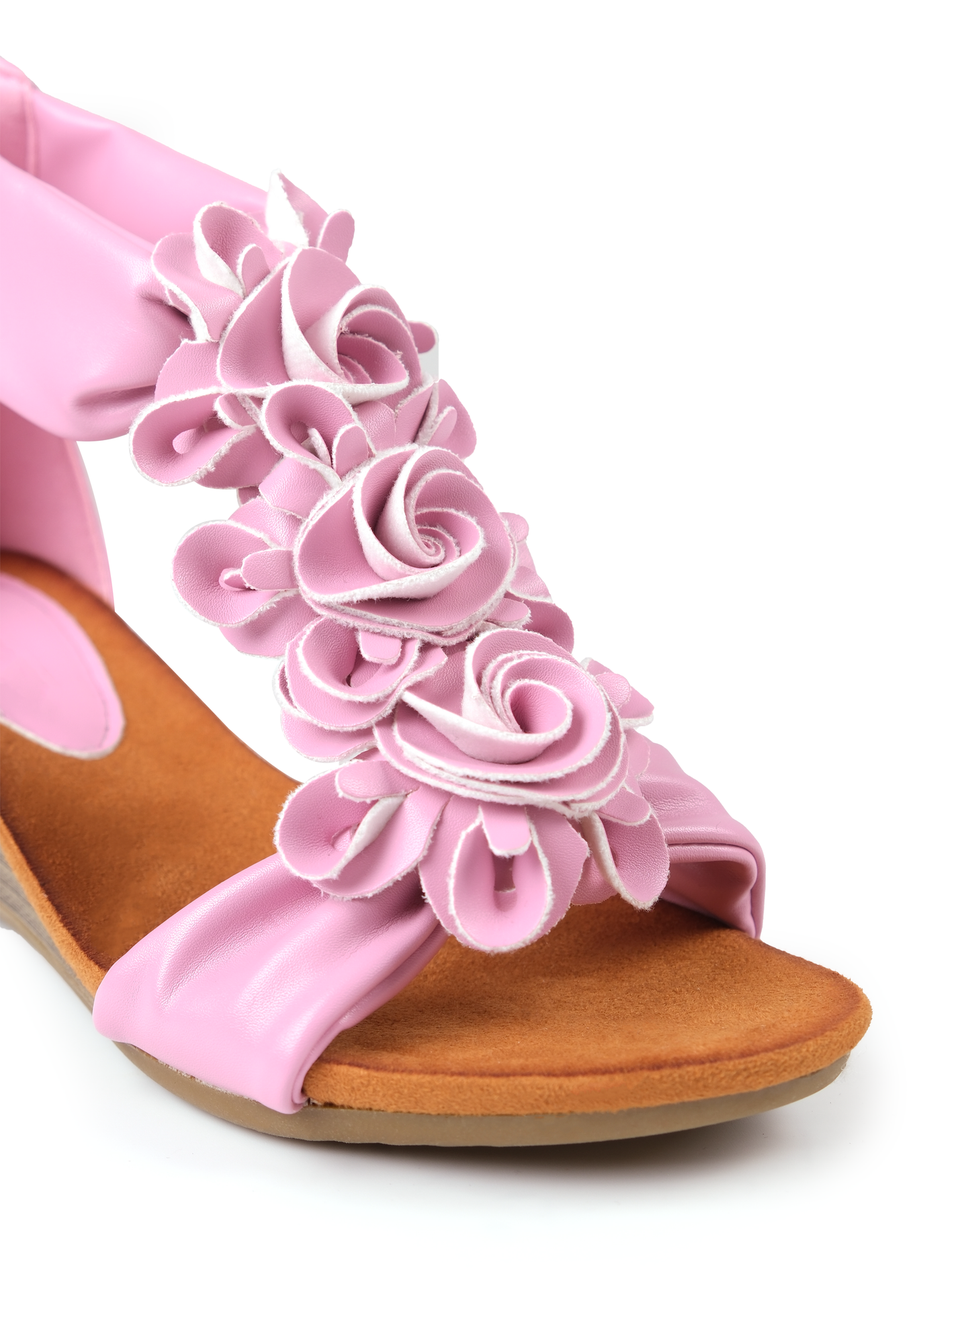 Where's That From Pink Pu Abilene Low Wedge Heel Sandals